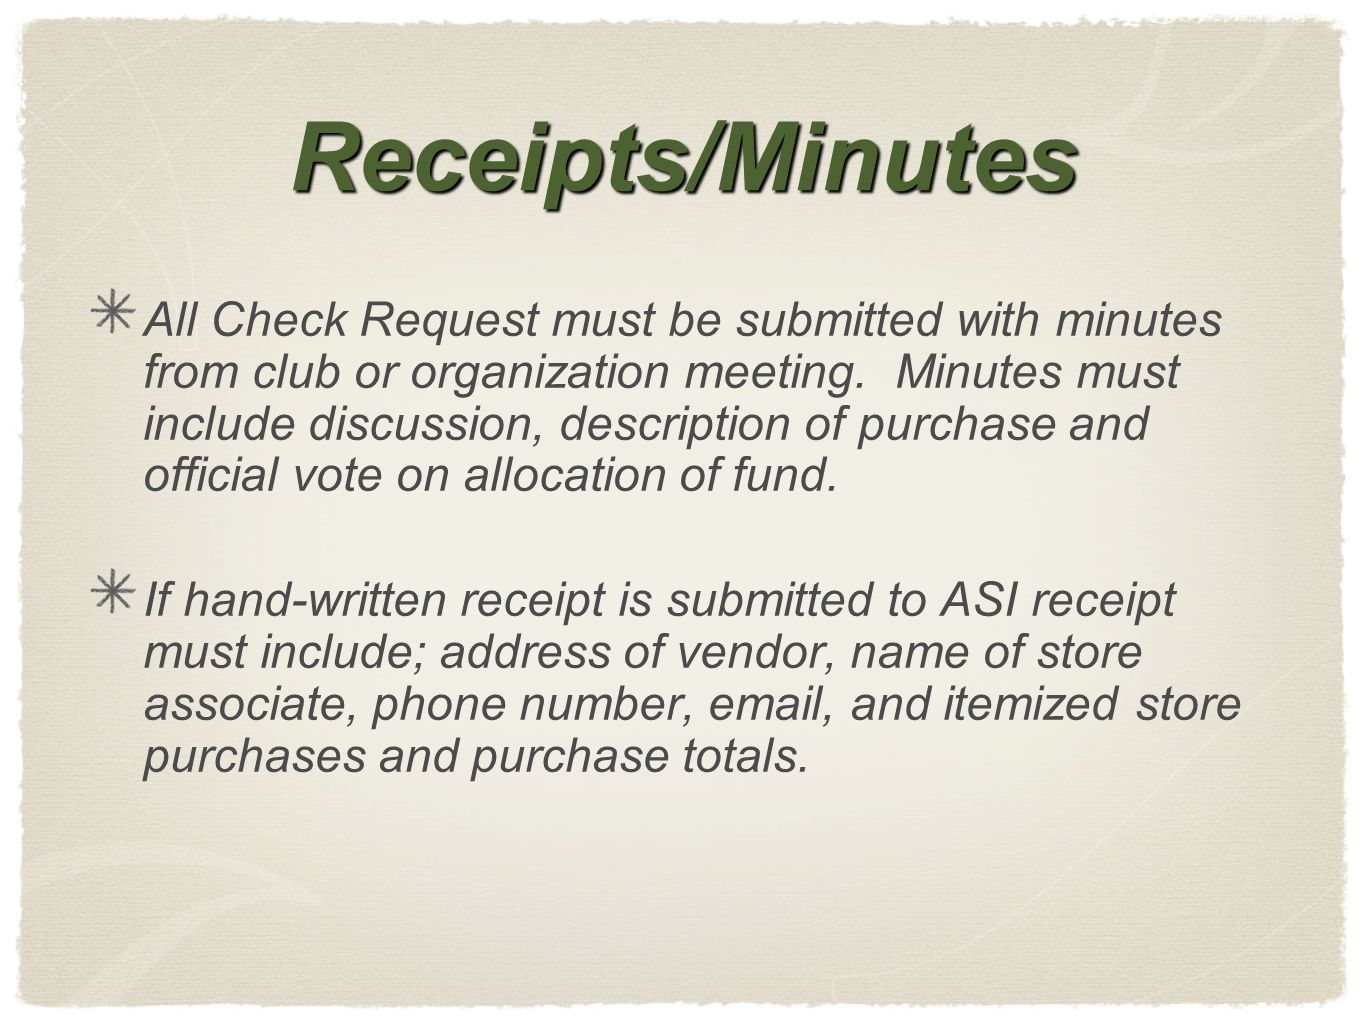 Receipts/Minutes All Check Request must be submitted with minutes from club or organization meeting.